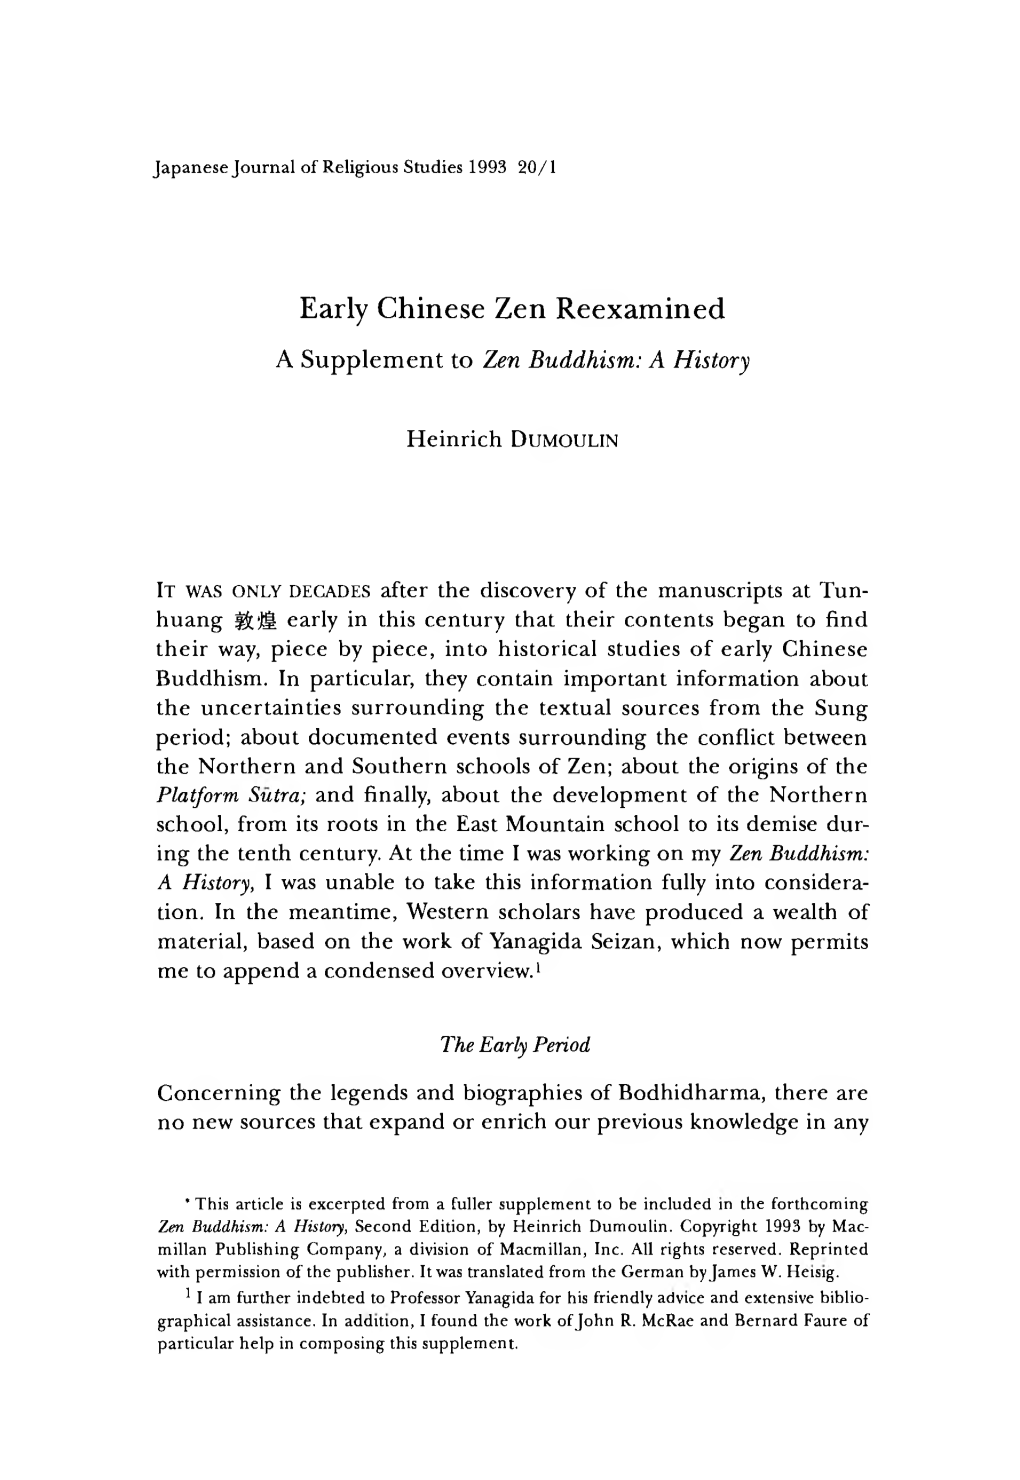 Early Chinese Zen Reexamined a Supplement to Zen Buddhism: a History